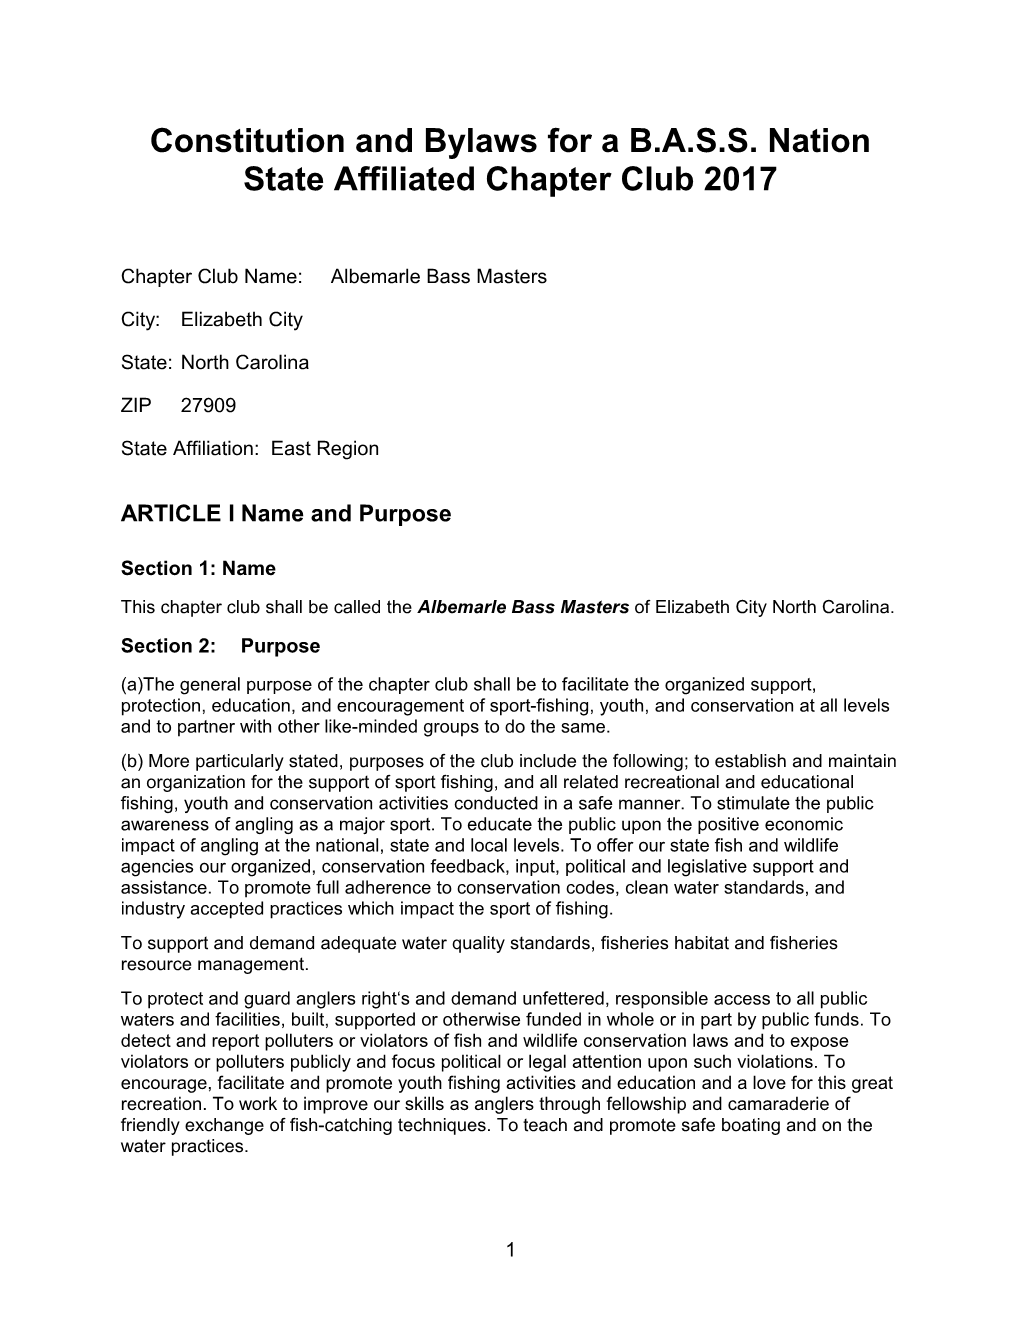 Constitution and Bylaws for a B.A.S.S. Nation State Affiliated Chapter Club 2017